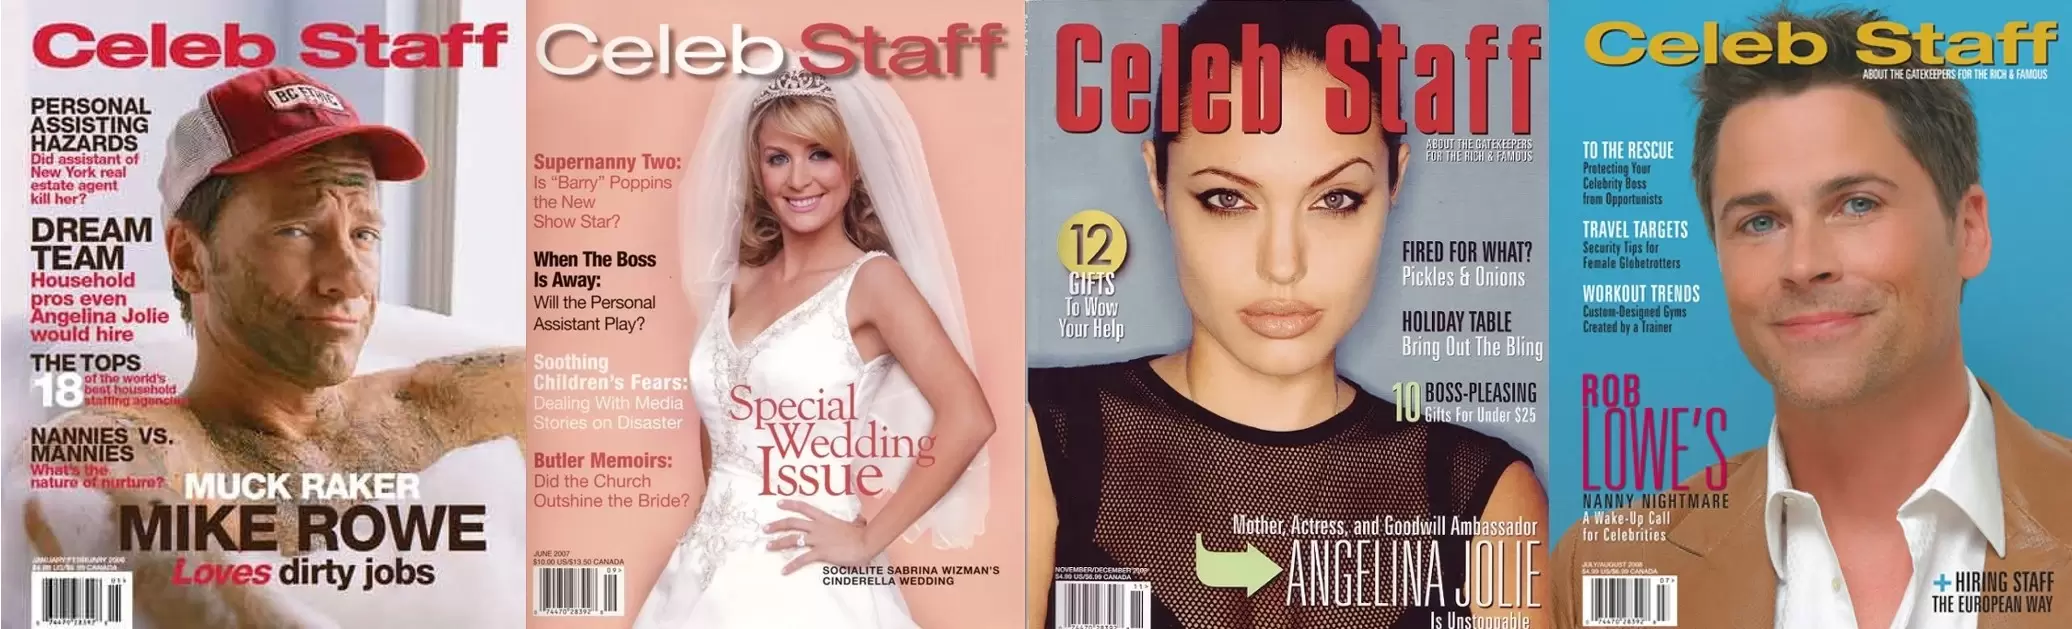 Celeb Staff Magazine history and review